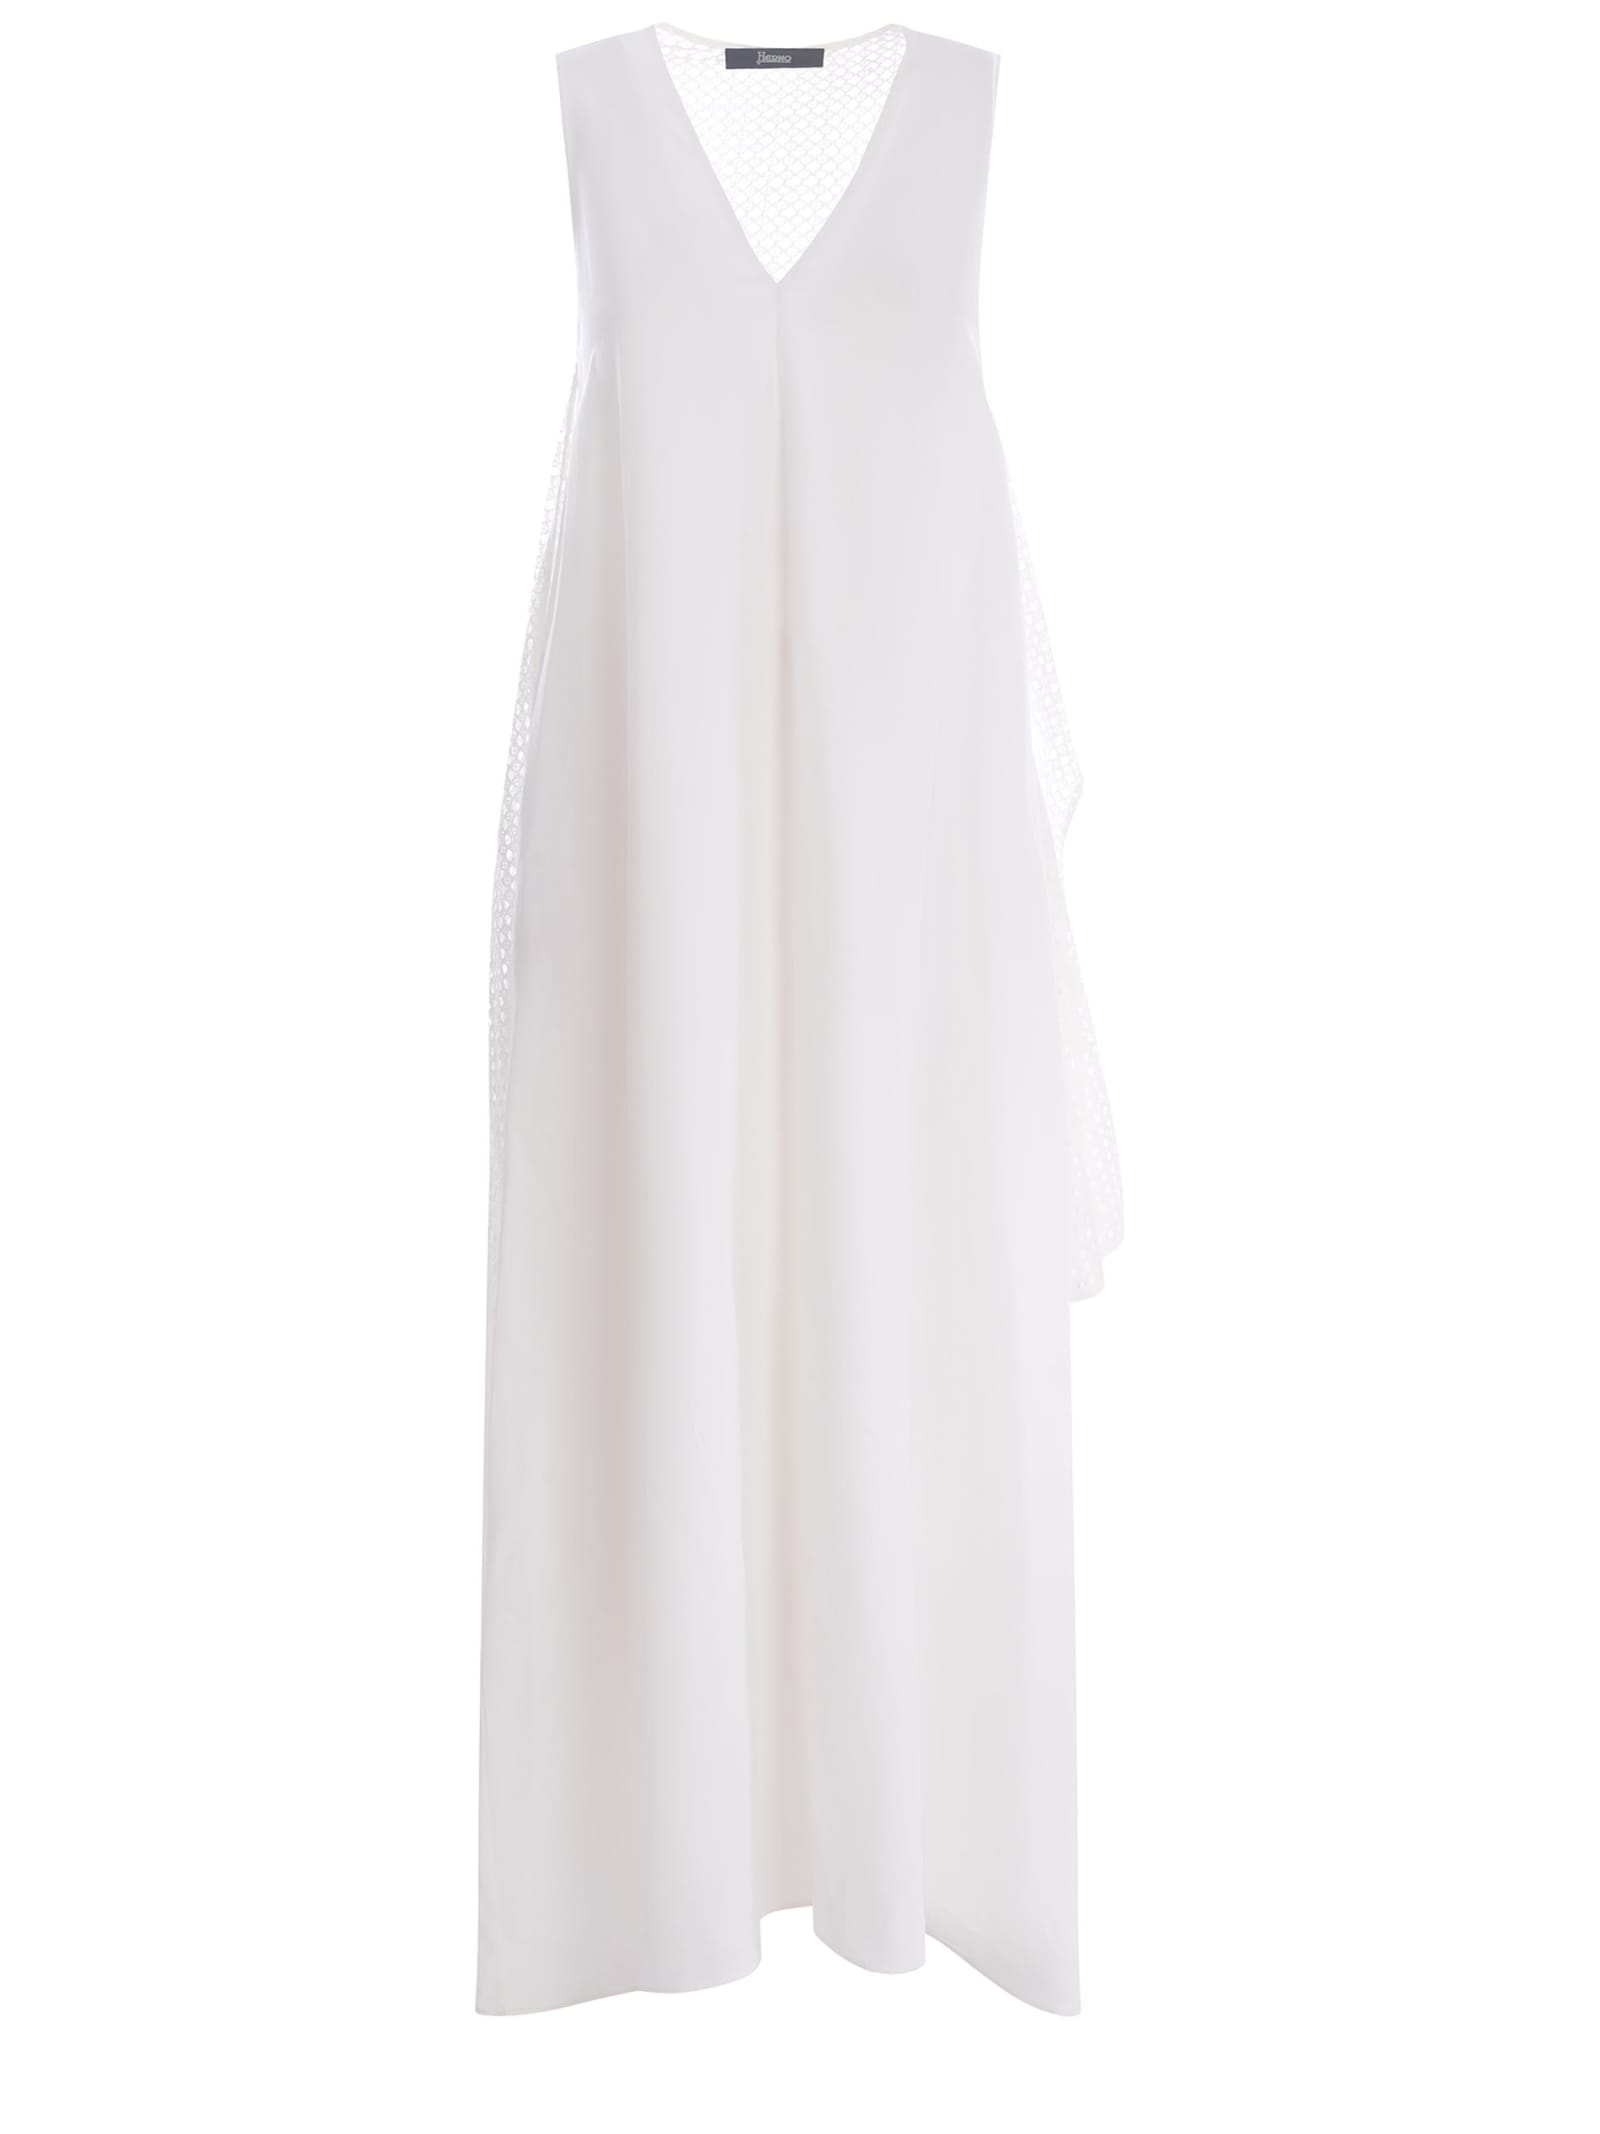 Dress Herno Made Of Viscose And Linen